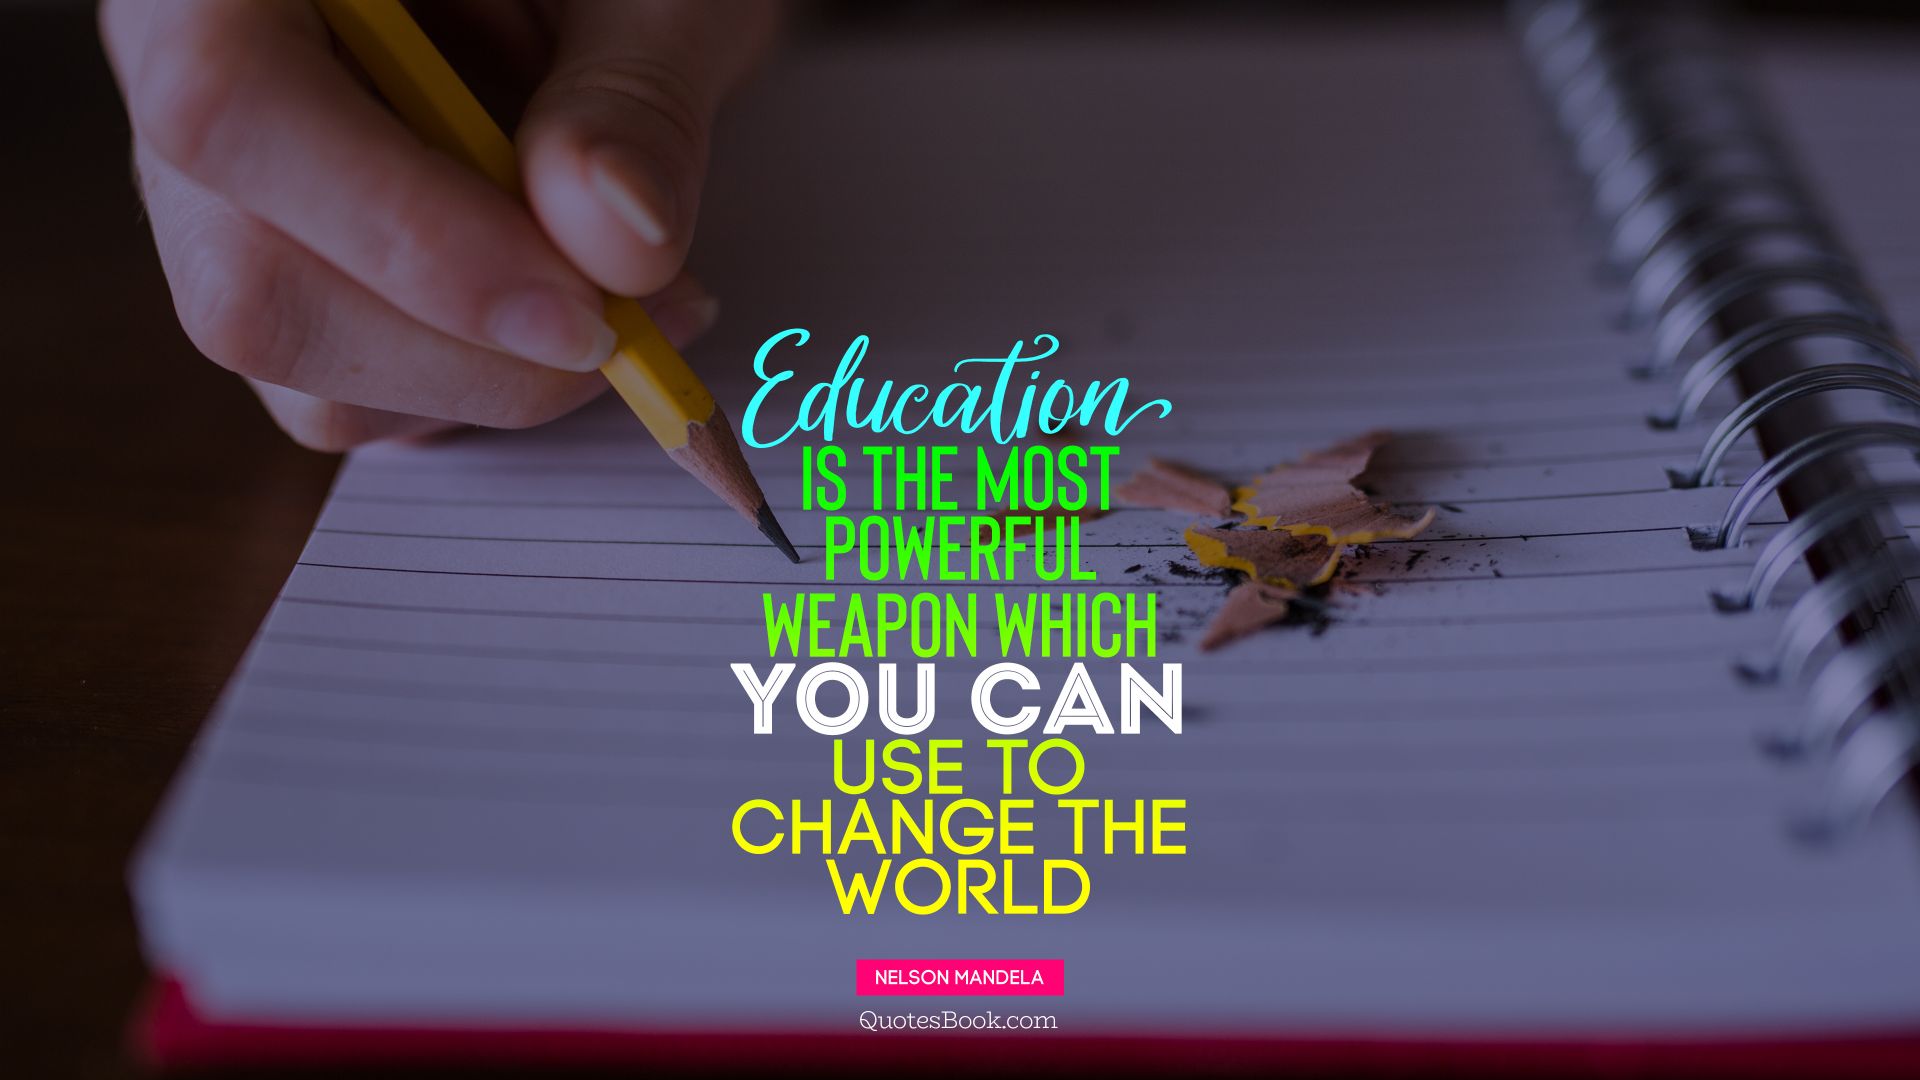 Education is the most powerful weapon which you can use to change the world. - Quote by Nelson Mandela